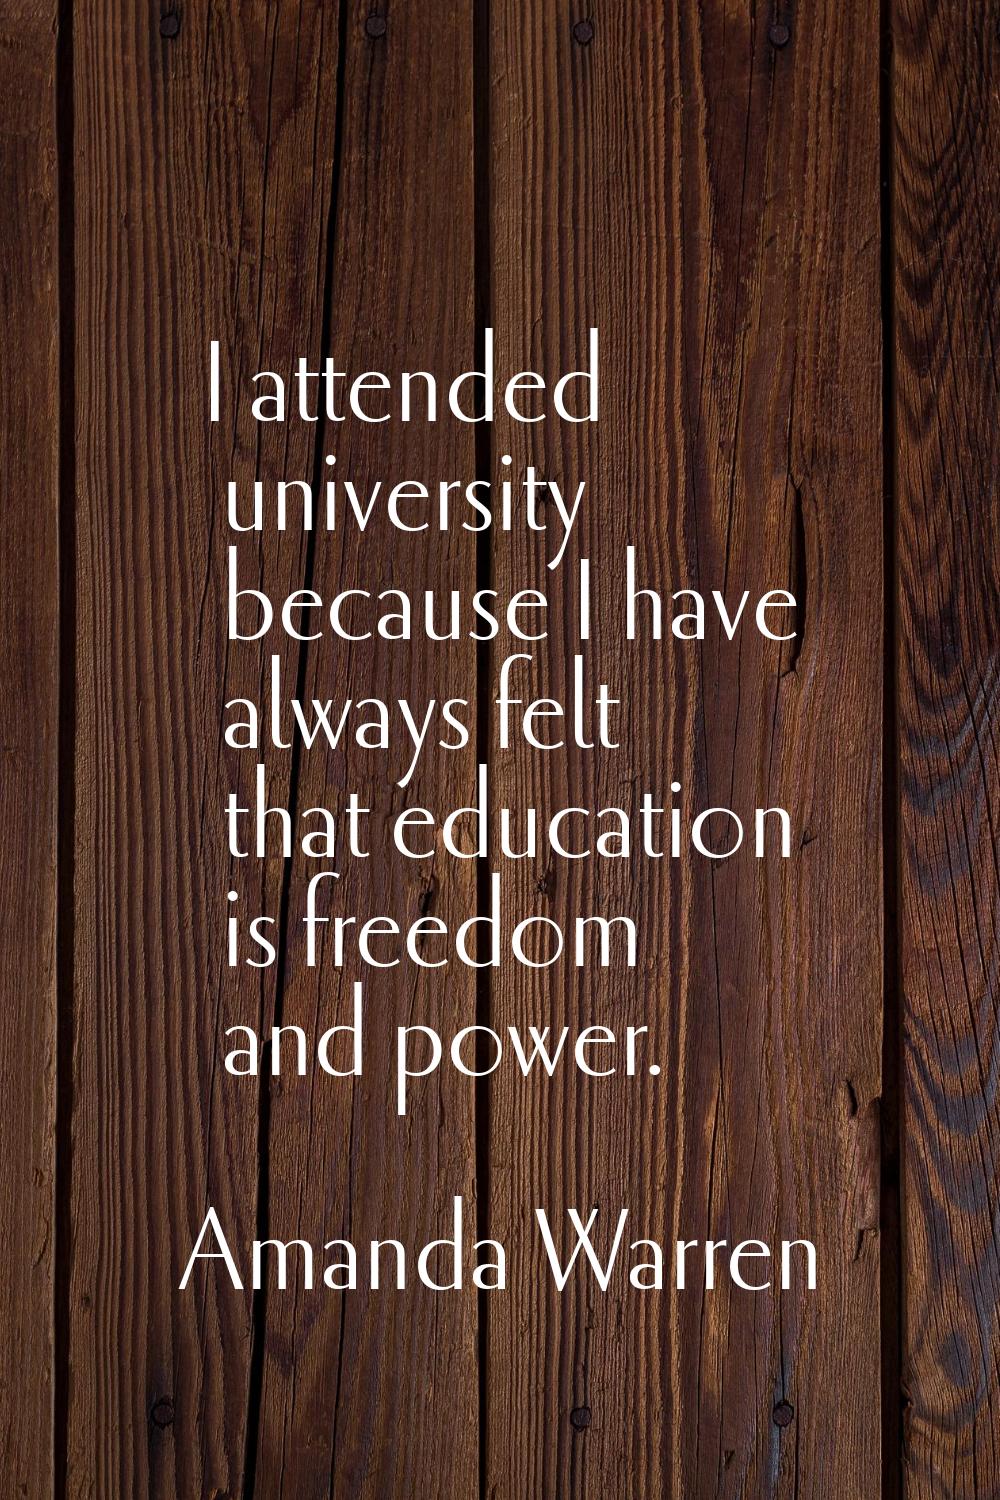 I attended university because I have always felt that education is freedom and power.